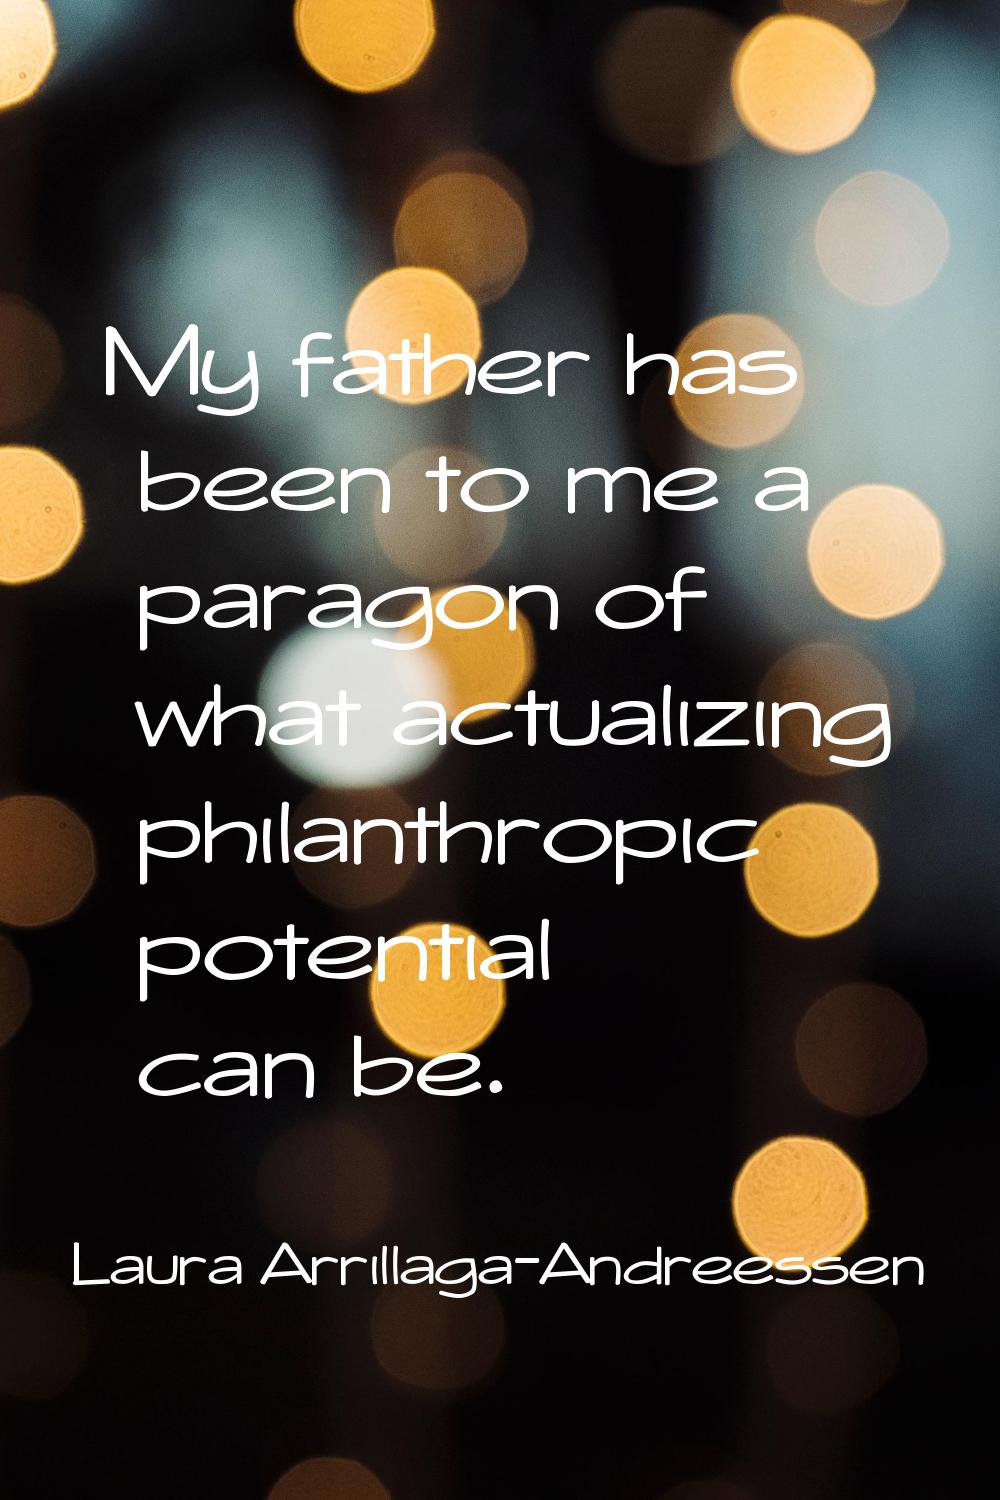 My father has been to me a paragon of what actualizing philanthropic potential can be.